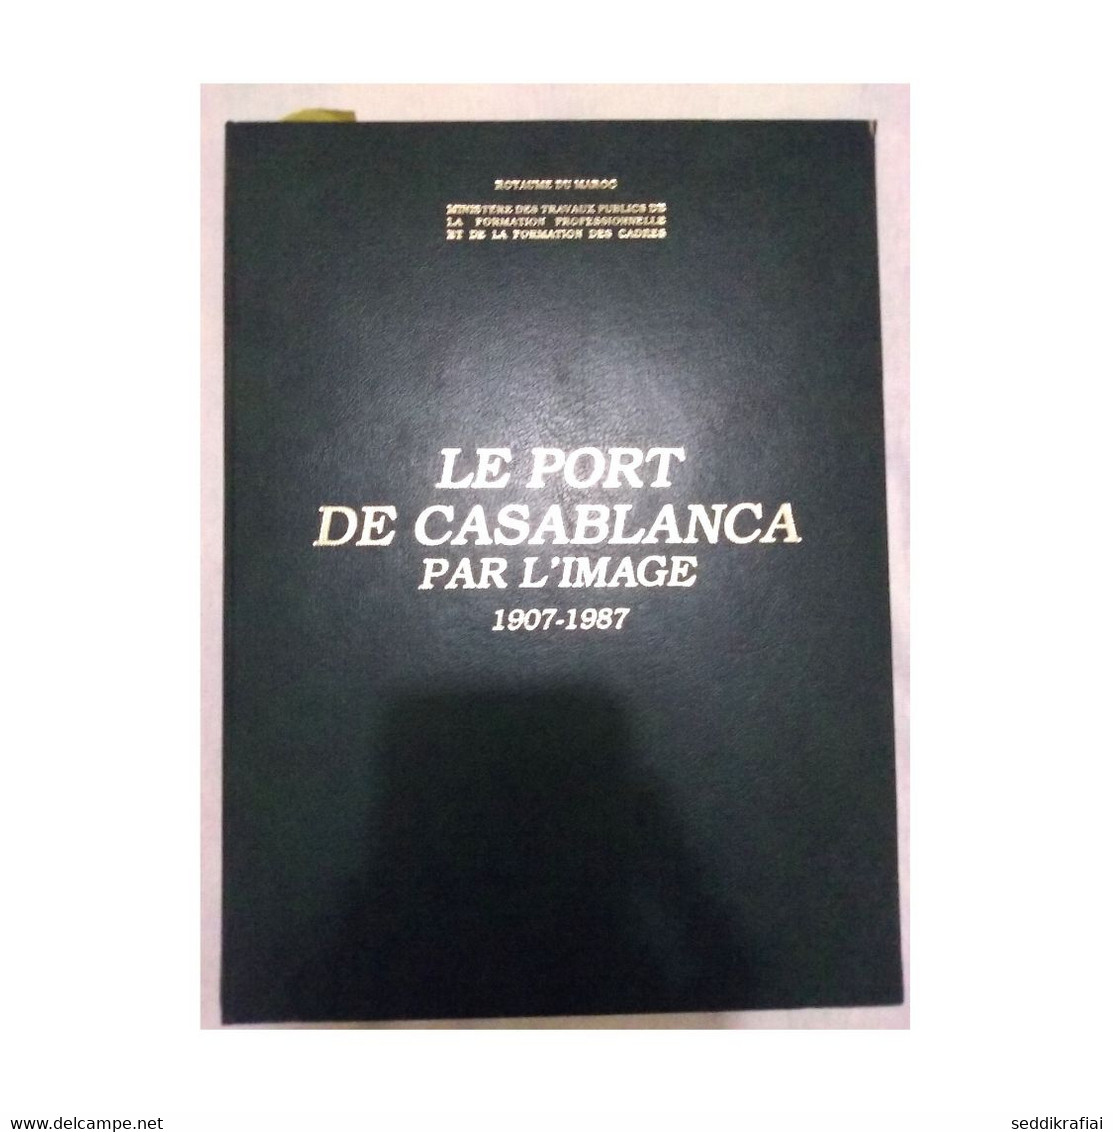 Vintage Morocco Book The Port Of Casablanca Binding Leather By The Image 1907-1987 Hassan 2 - Magazines & Catalogues